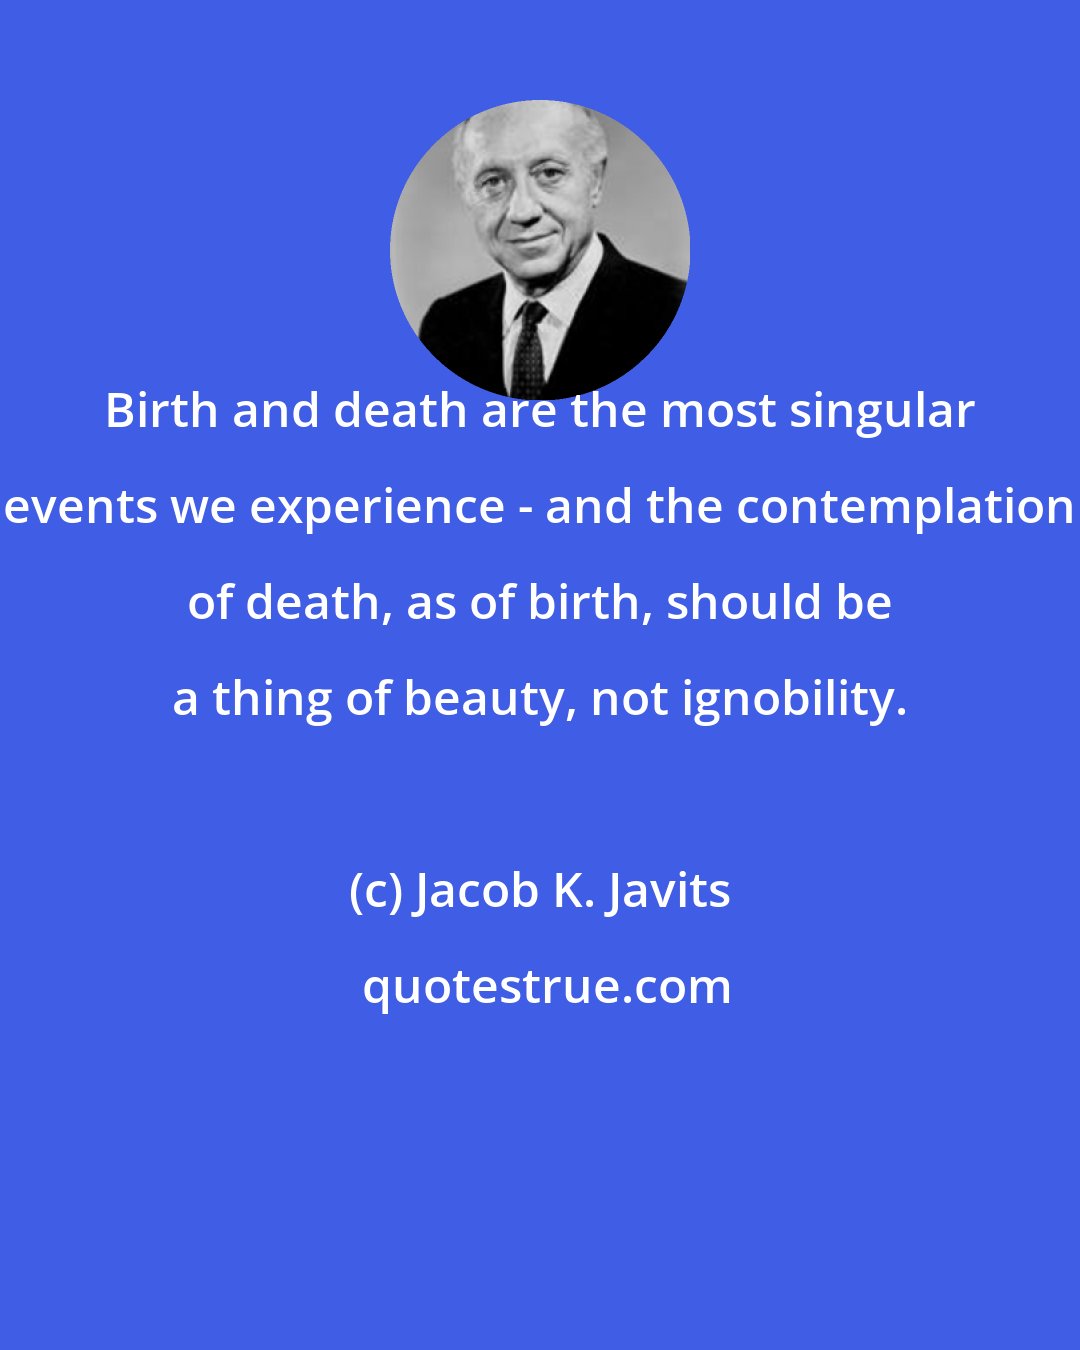 Jacob K. Javits: Birth and death are the most singular events we experience - and the contemplation of death, as of birth, should be a thing of beauty, not ignobility.